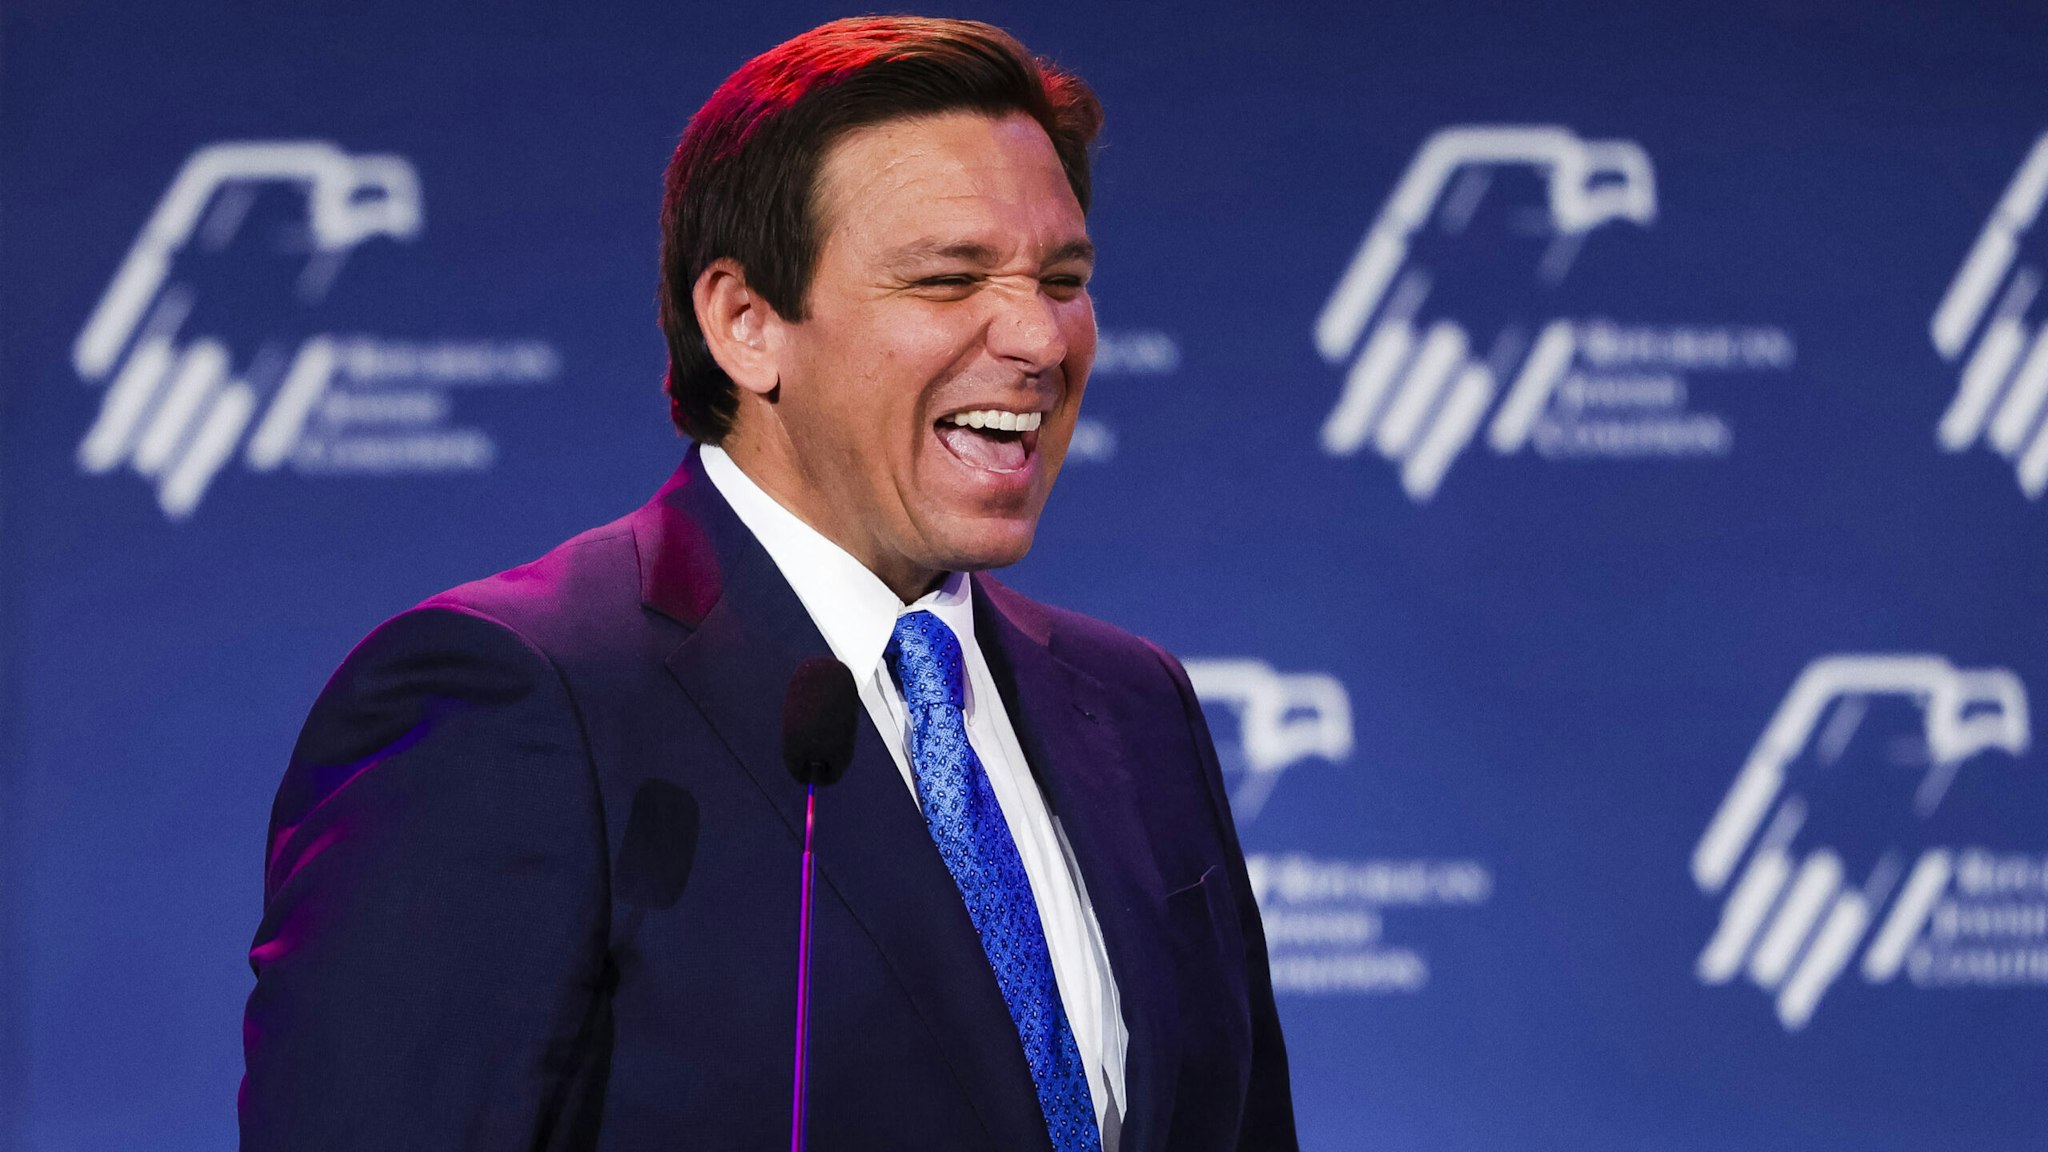 Republican Florida Governor Ron DeSantis smiles to supporters at the Republican Jewish Coalition Annual Leadership Meeting in Las Vegas, Nevada, on November 19, 2022.